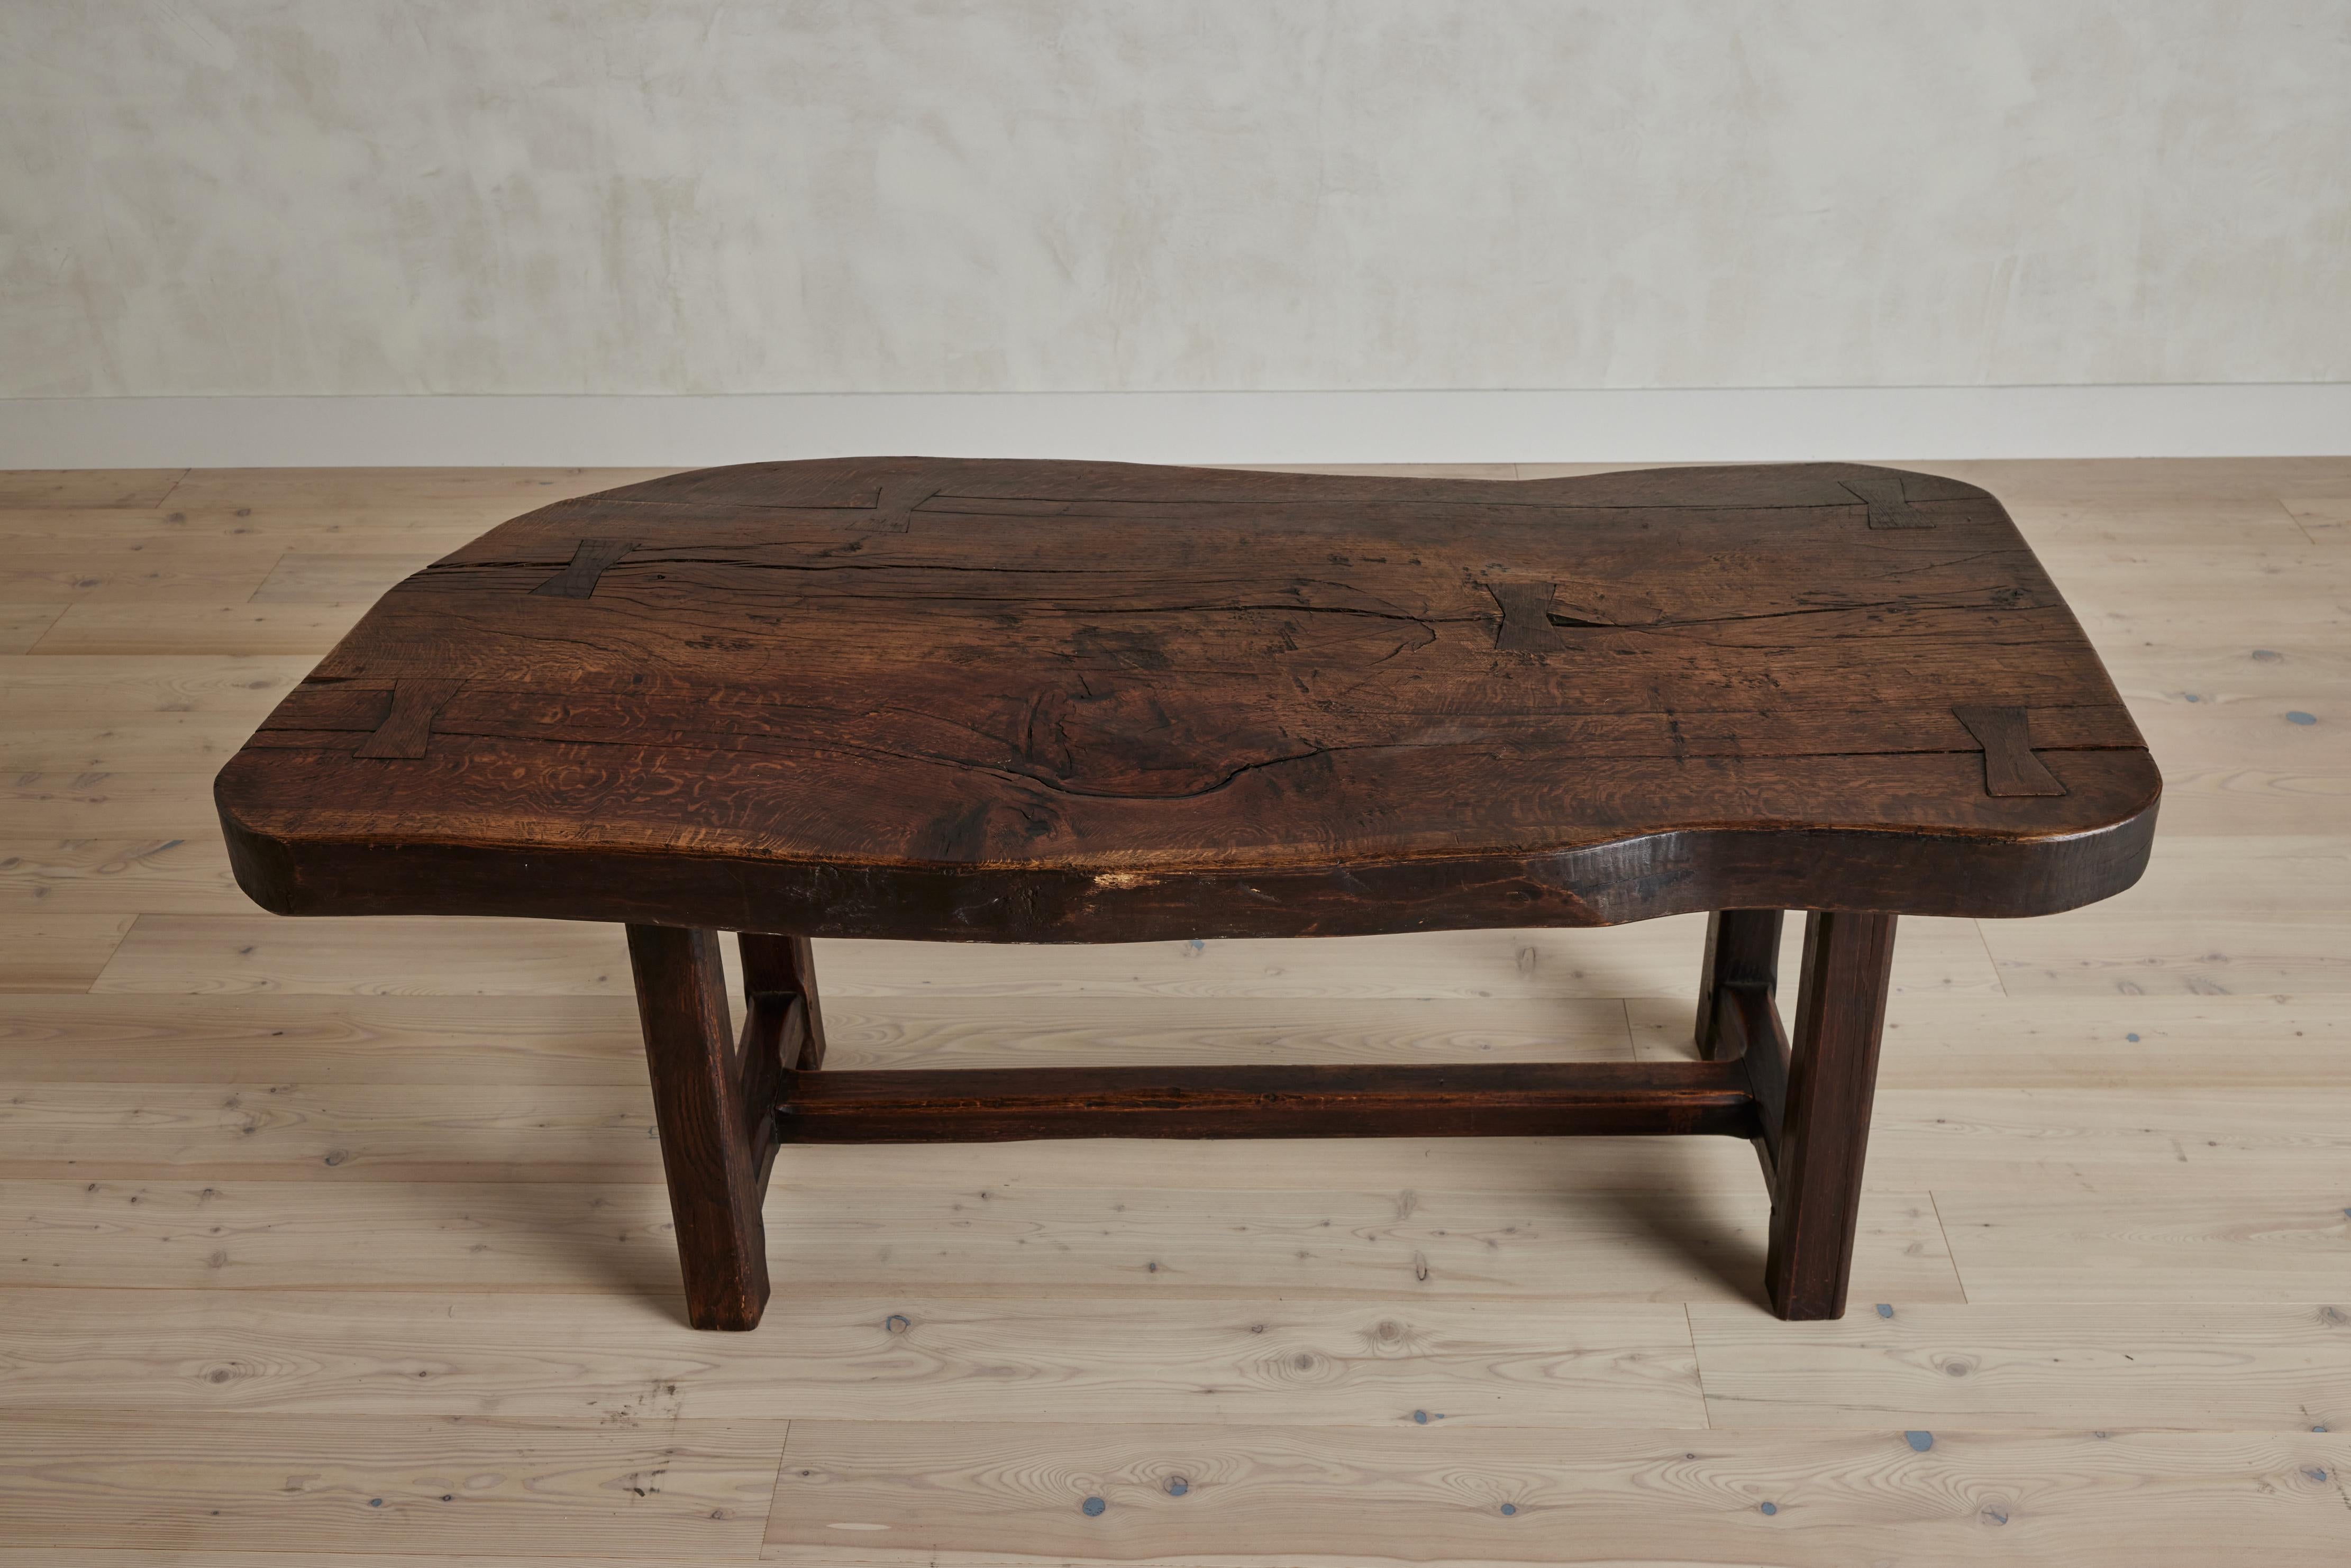 Tobacco hued oak farm table with a rustic live edge detail. France circa early 20th century. Top is slightly bowed. Good vintage condition with some visible wear consistent with age and use. 